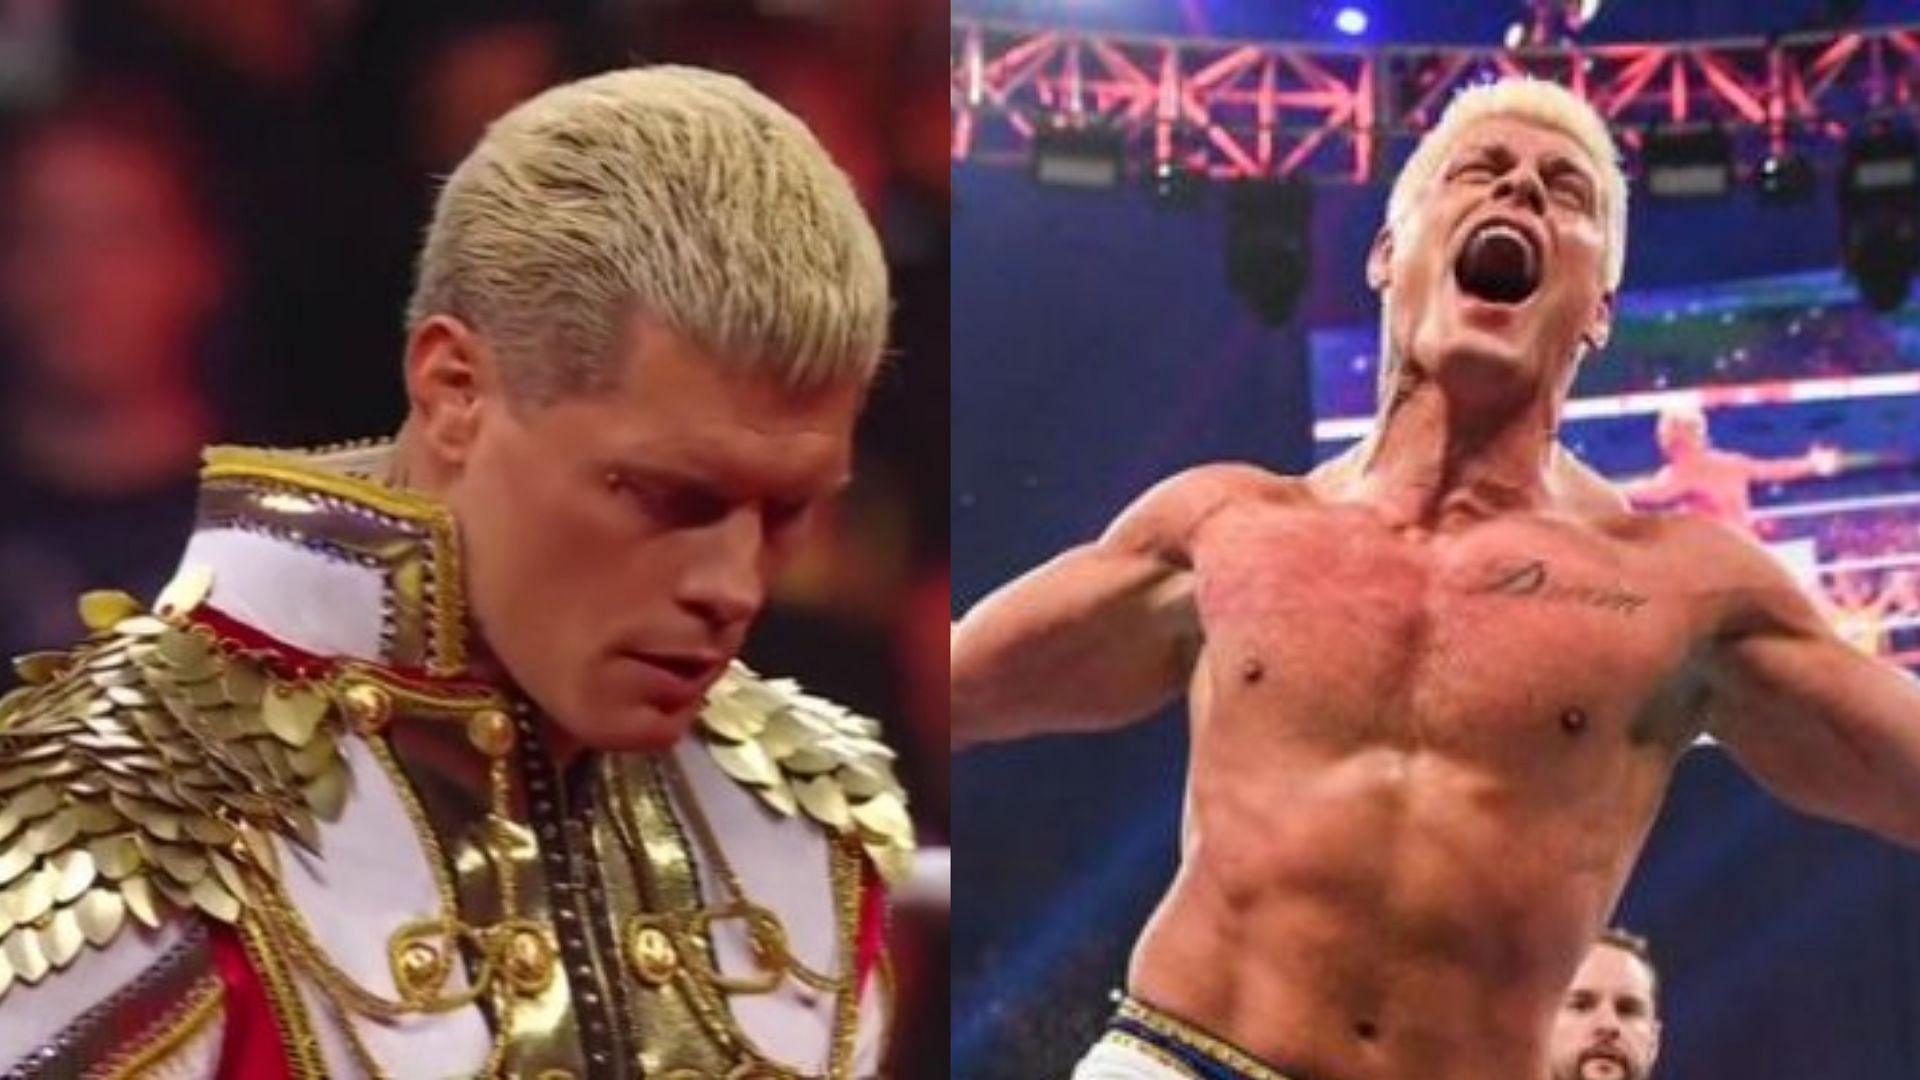 Cody Rhodes appears set for Money in the Bank now